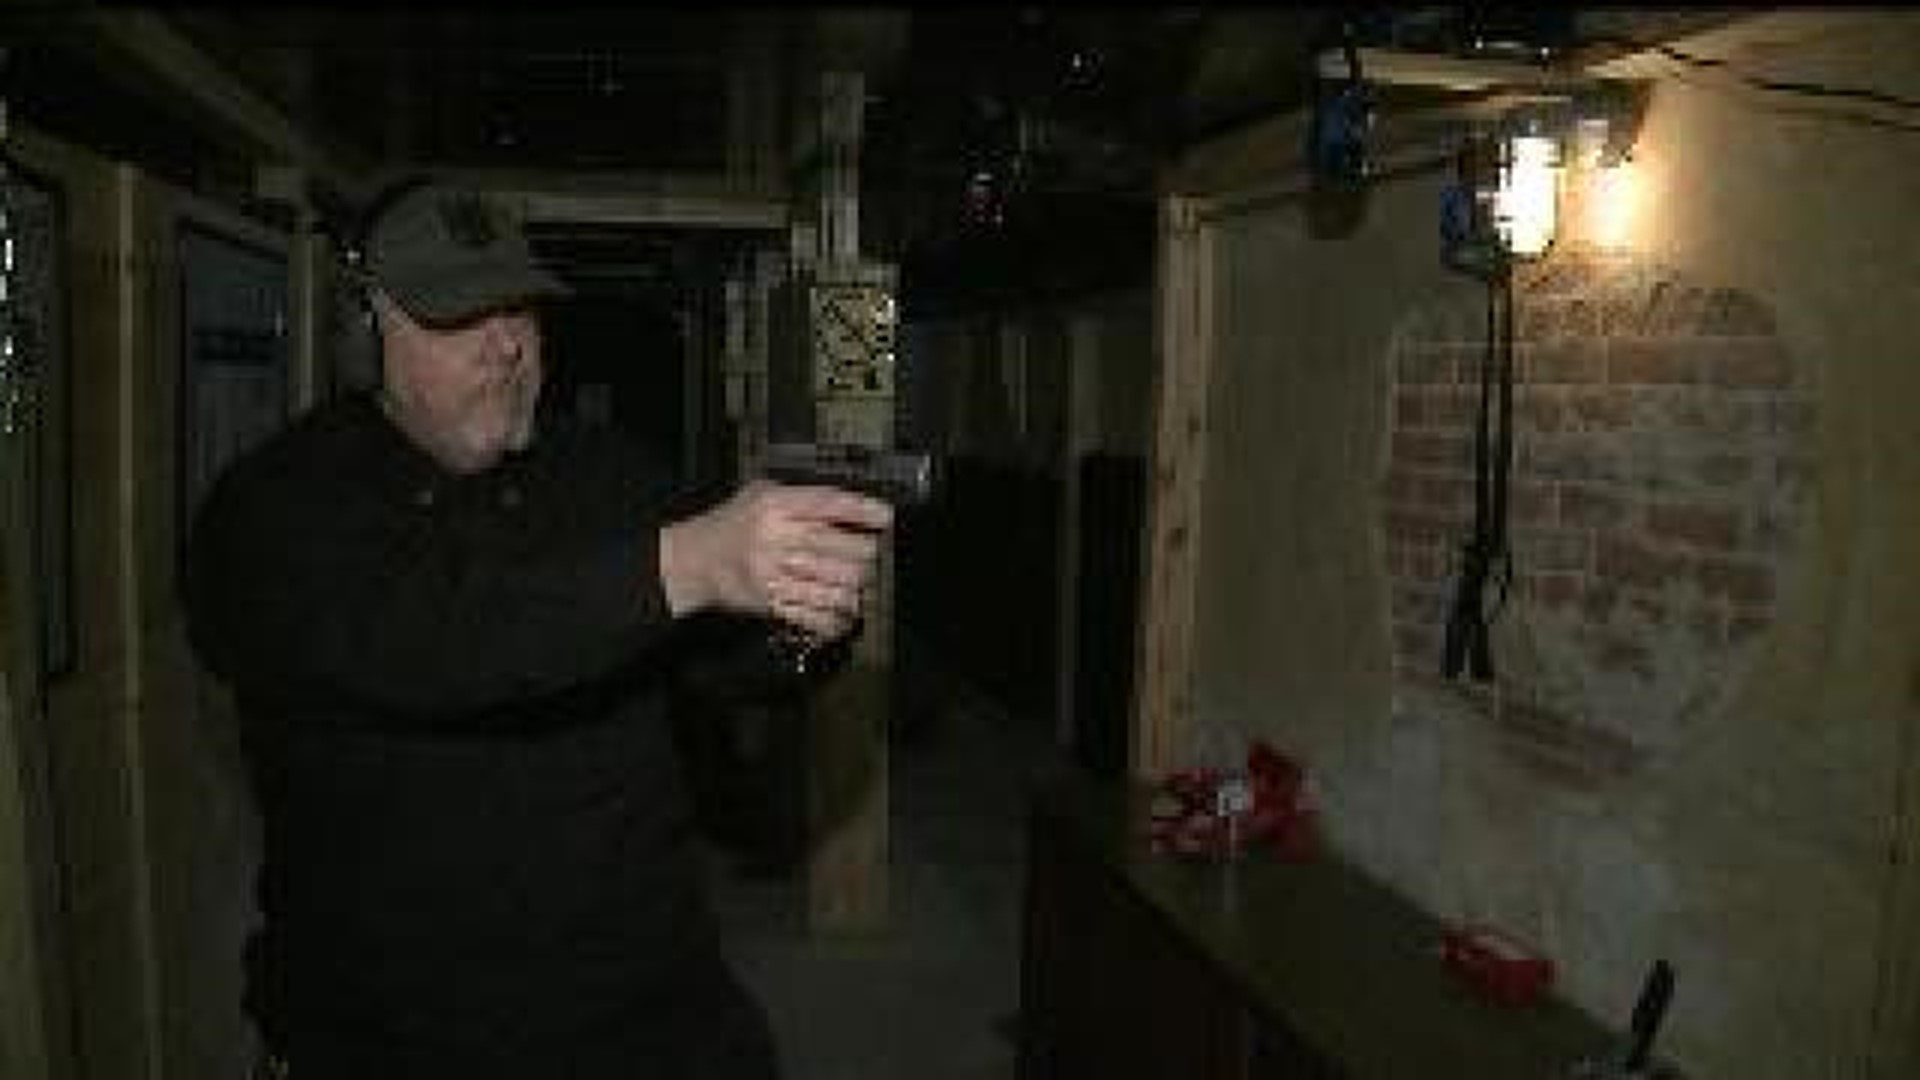 Concealed carry makes Illinois gun ranges busy